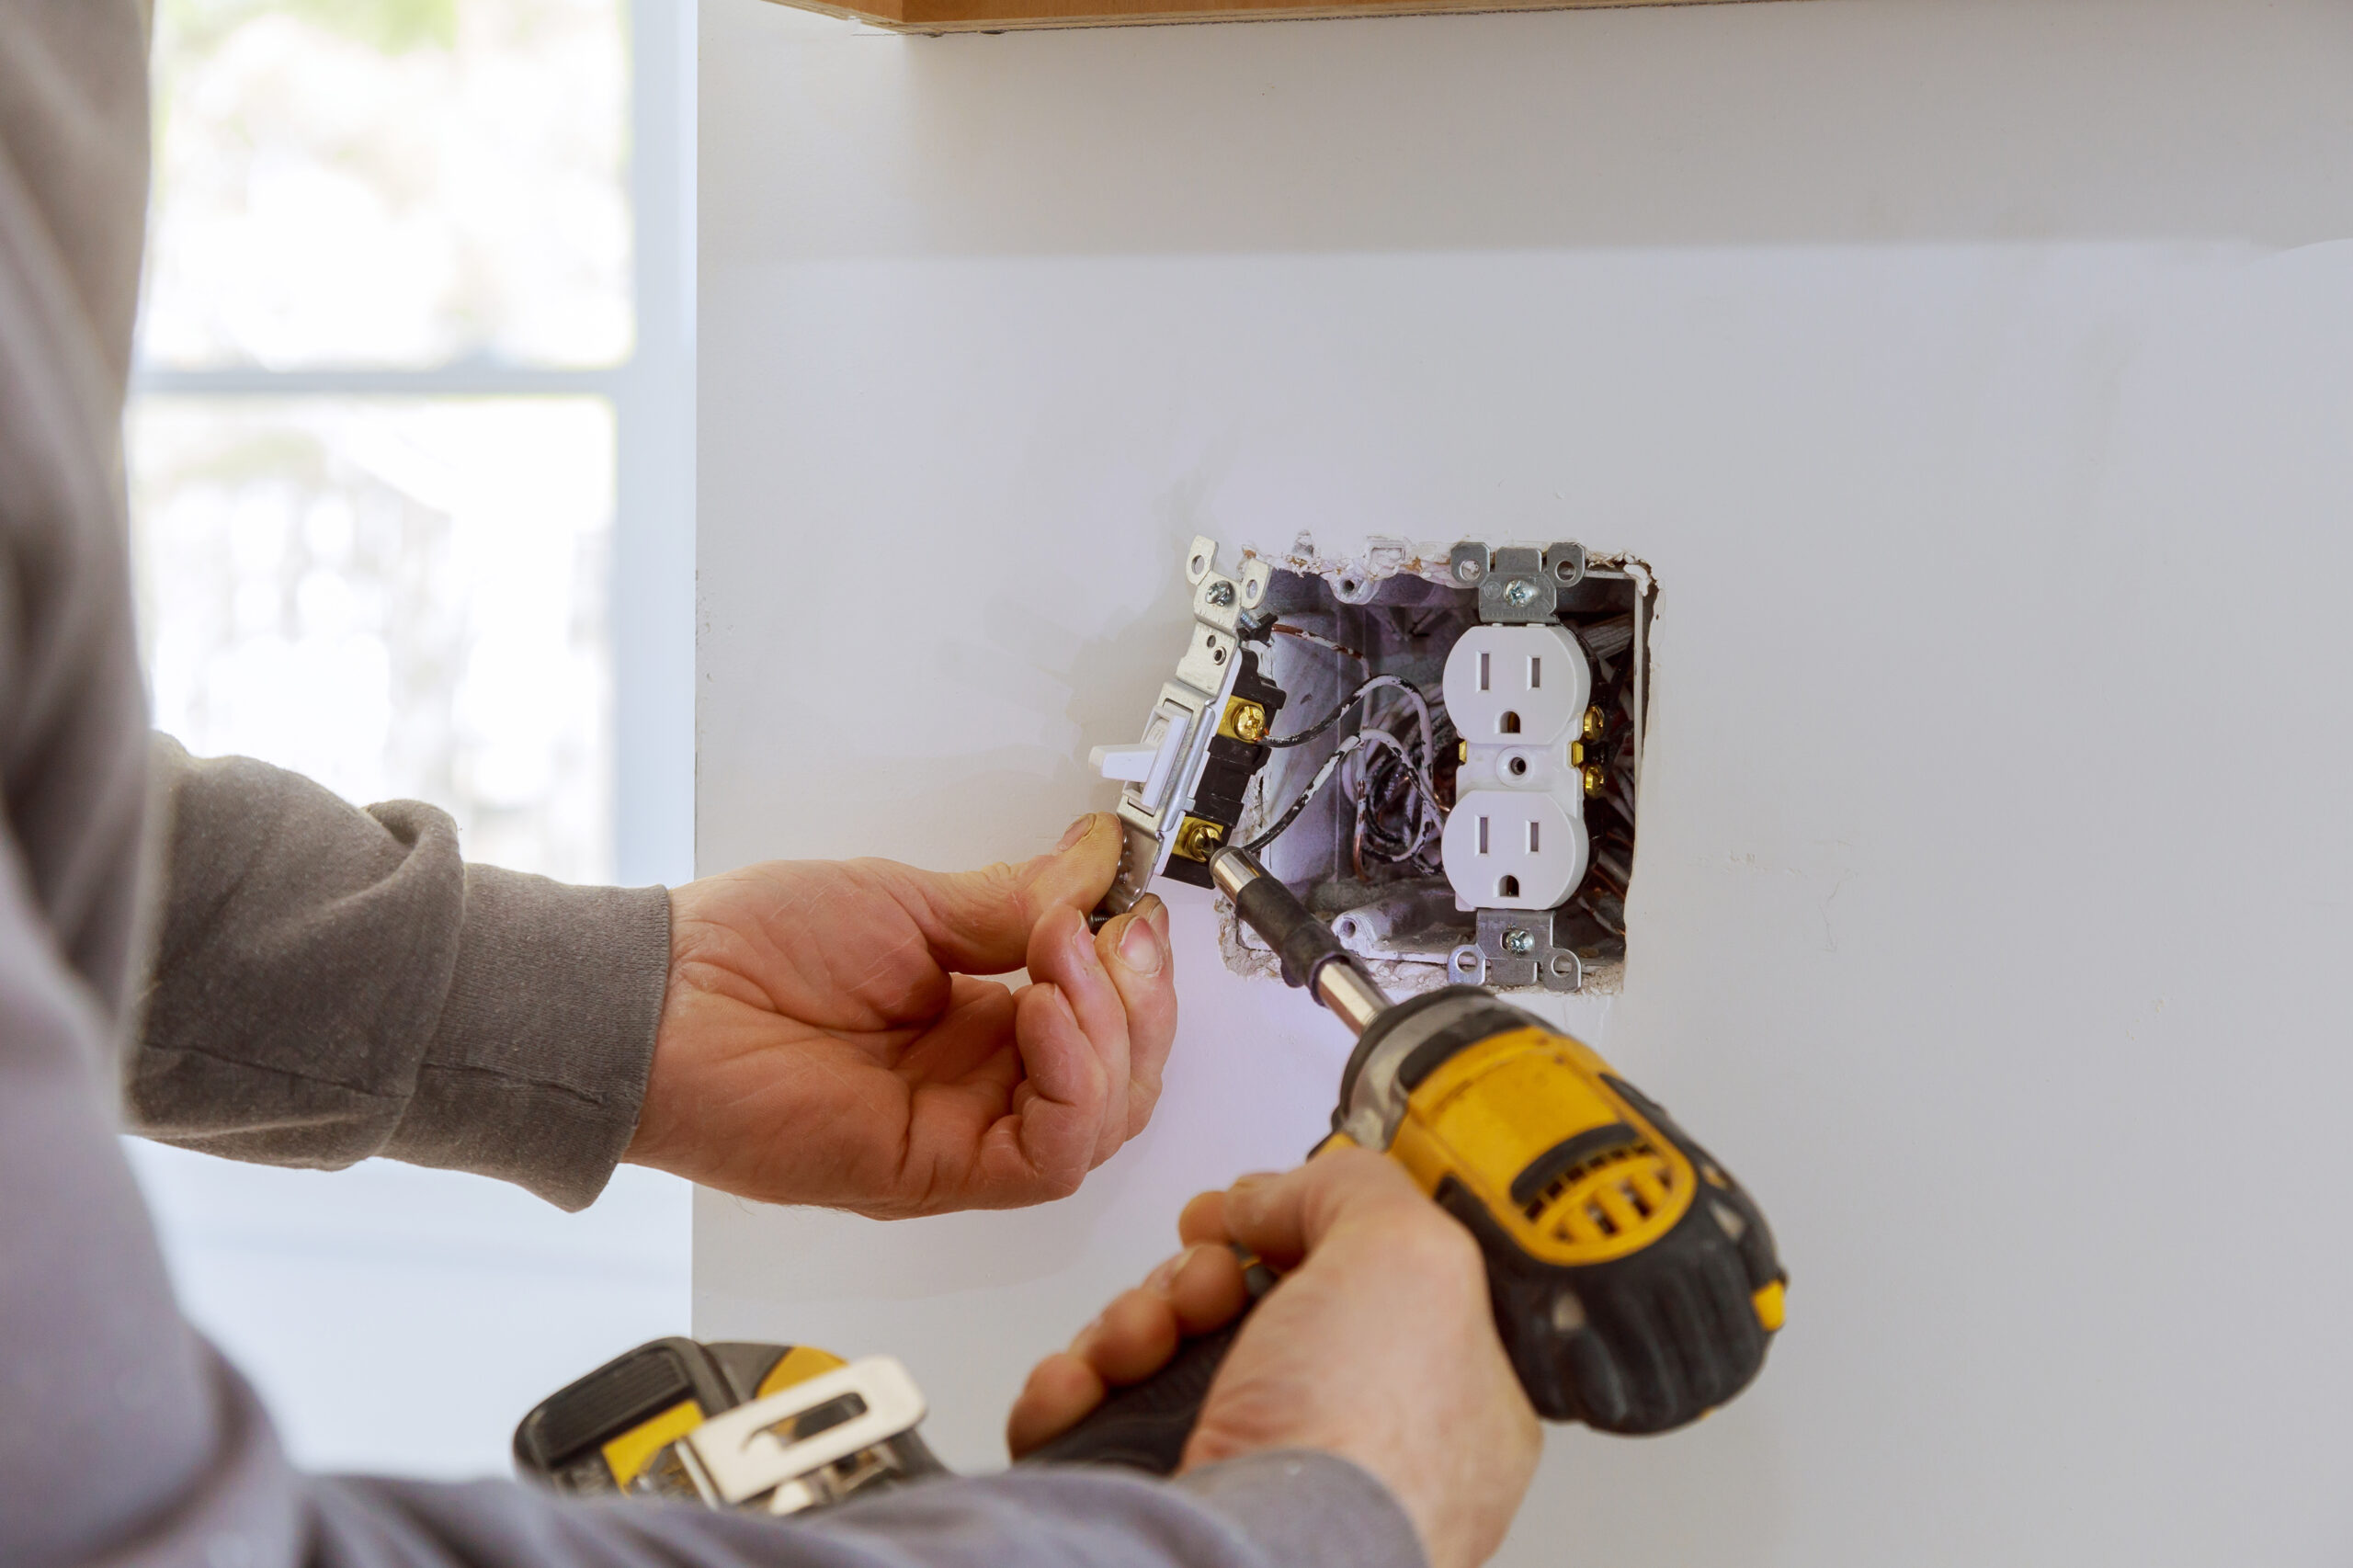 Work on installing electrical outlets with electrical wires and connector installed in plasterboard drywall